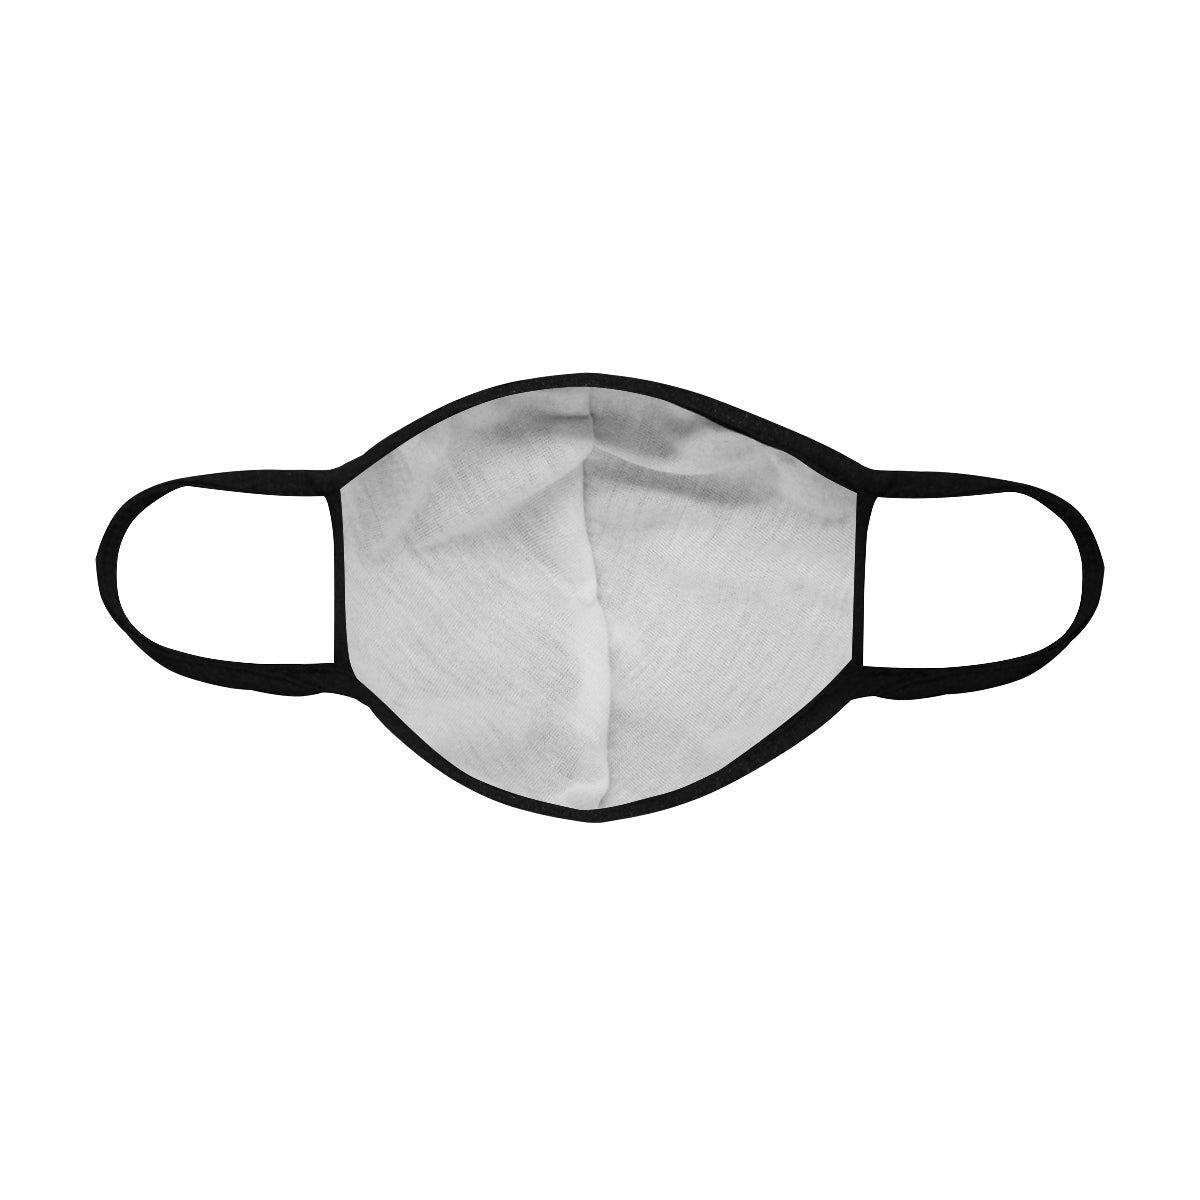 flyersetcinc Camo Print Cotton Fabric Face Mask with filter slot (30 Filters Included) - Non-medical use